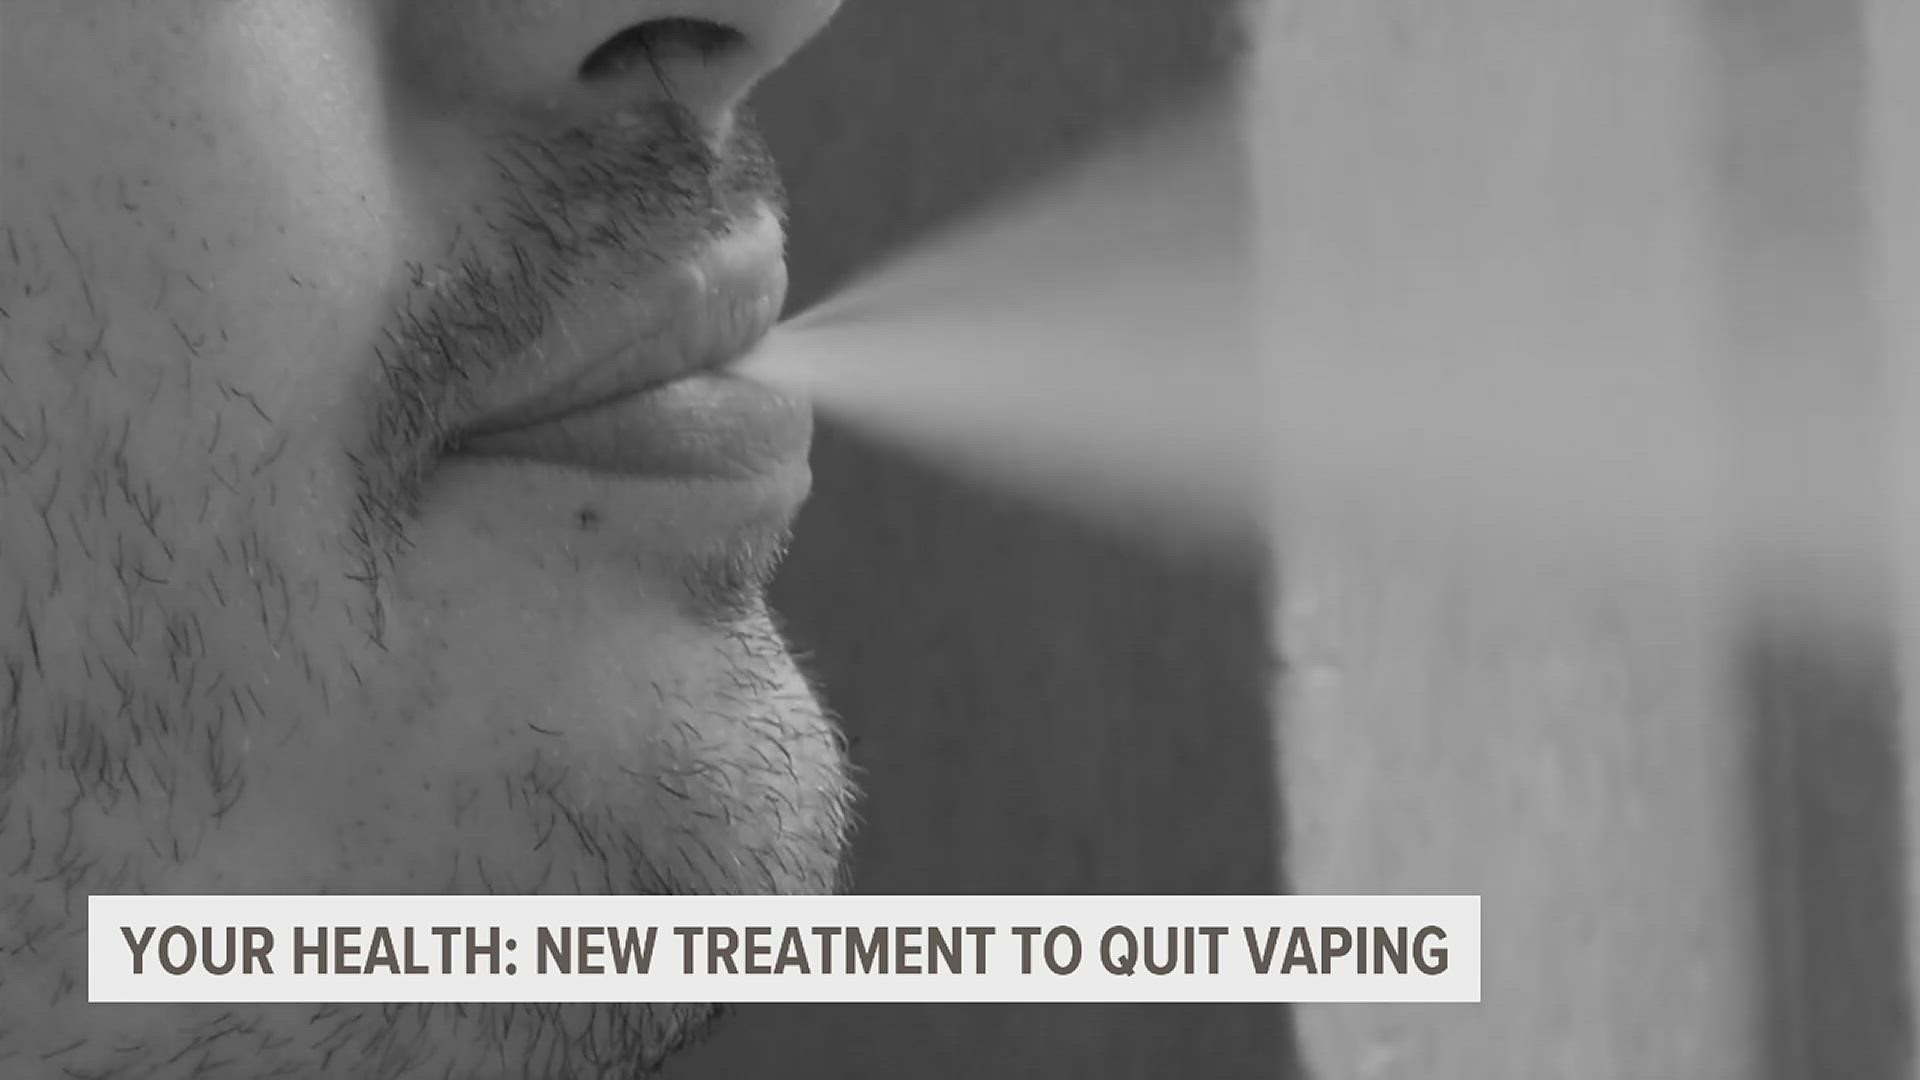 Scientists in Boston hope the plant-based drug 'Cytisinicline' can help nicotine users ween off their vapes while reducing withdrawal symptoms.